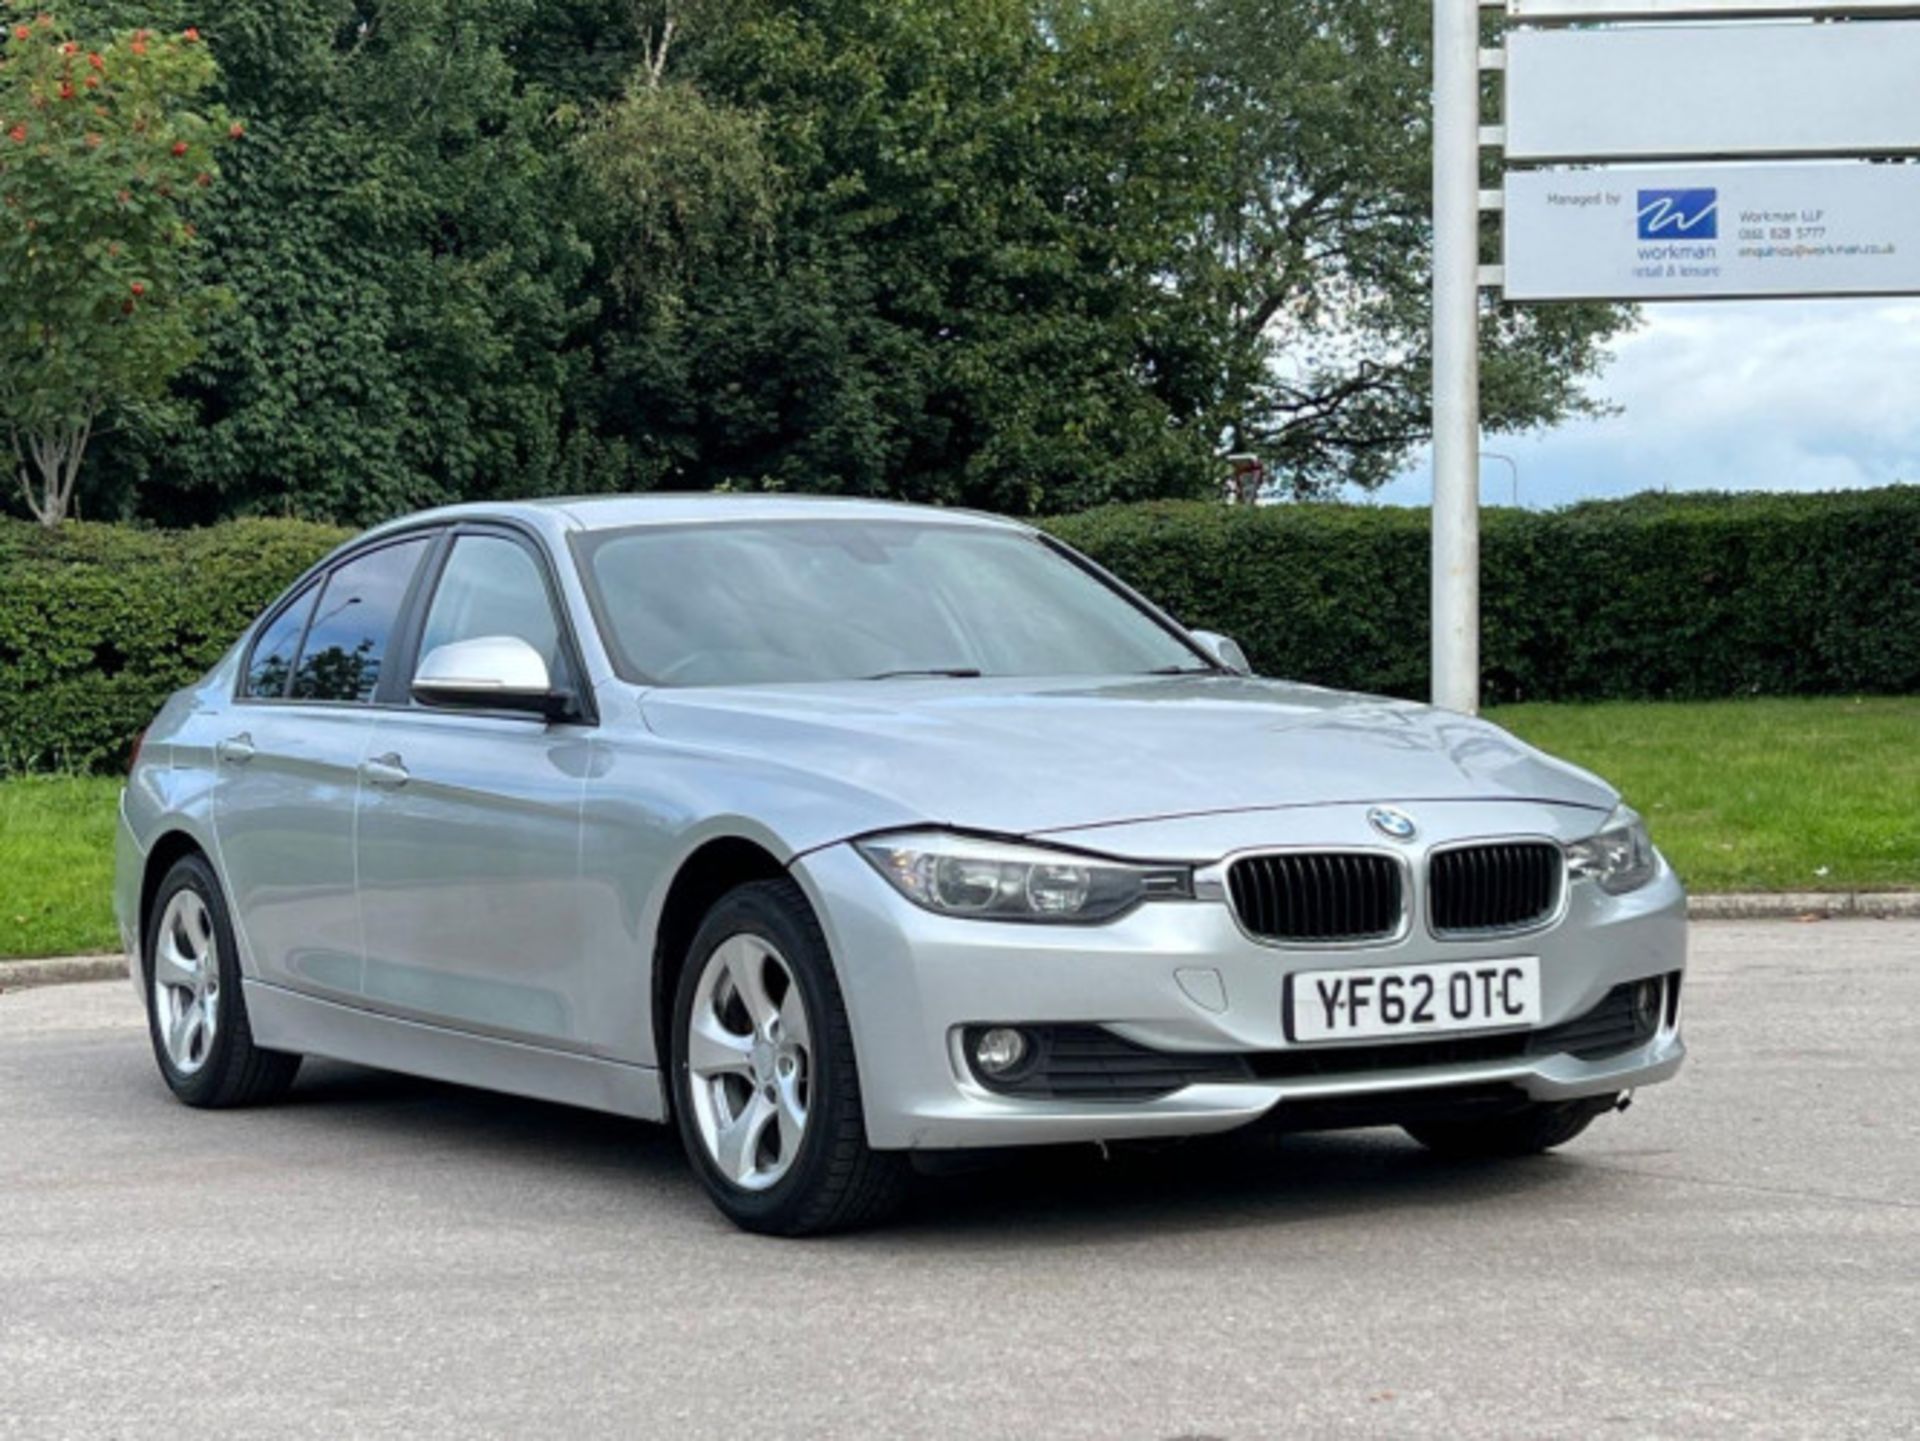 BMW 3 SERIES 2.0 DIESEL ED START STOP - A WELL-MAINTAINED GEM >>--NO VAT ON HAMMER--<< - Image 8 of 229